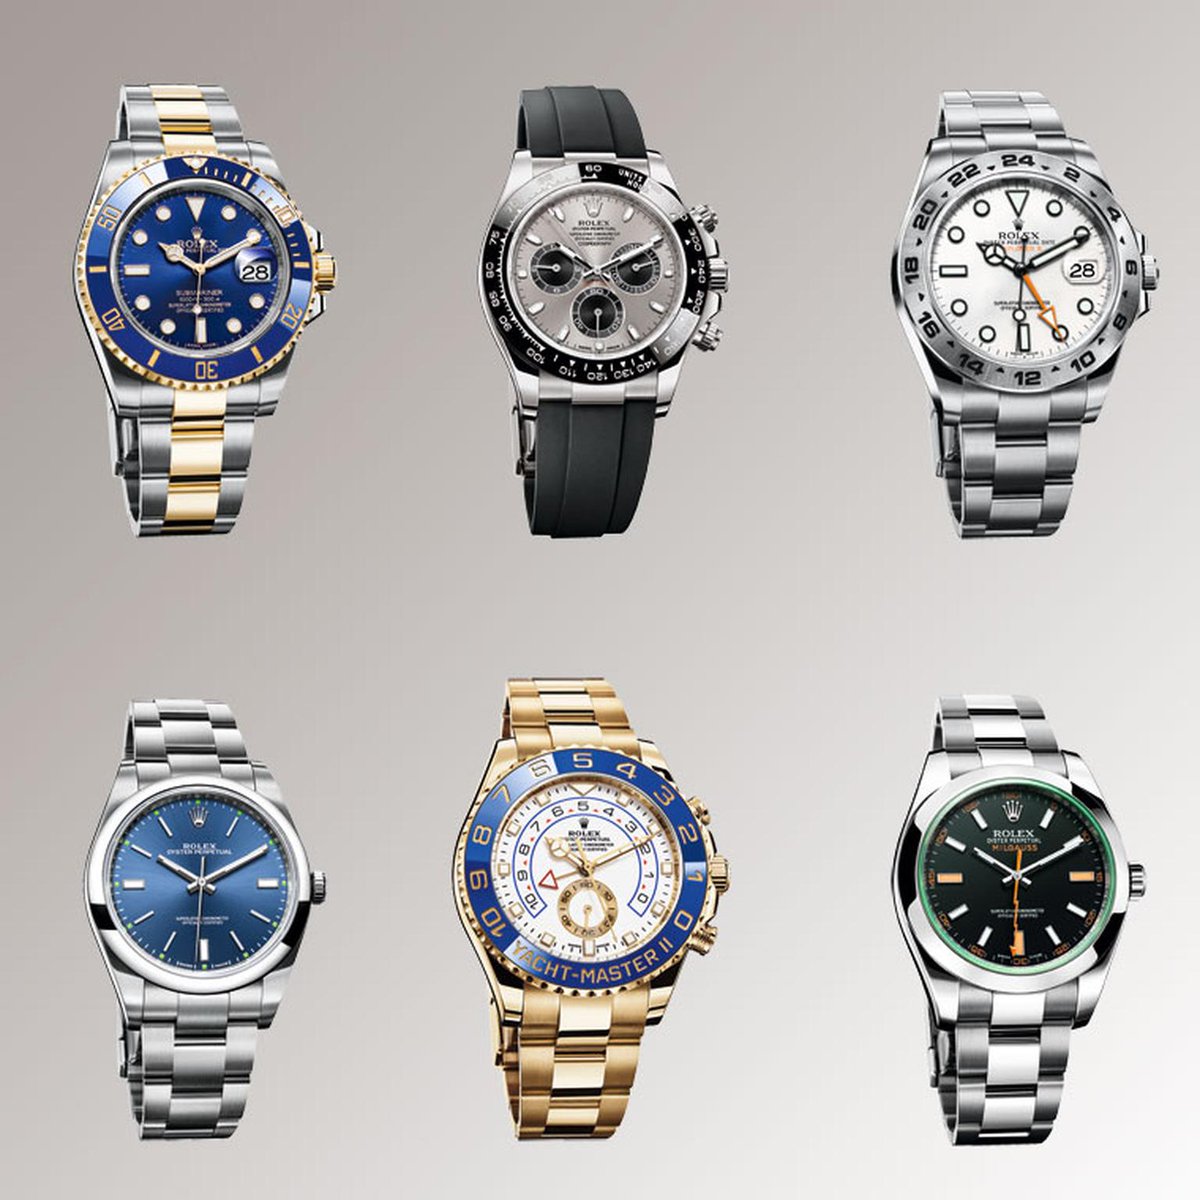 How to Purchase Rolex Watches Online